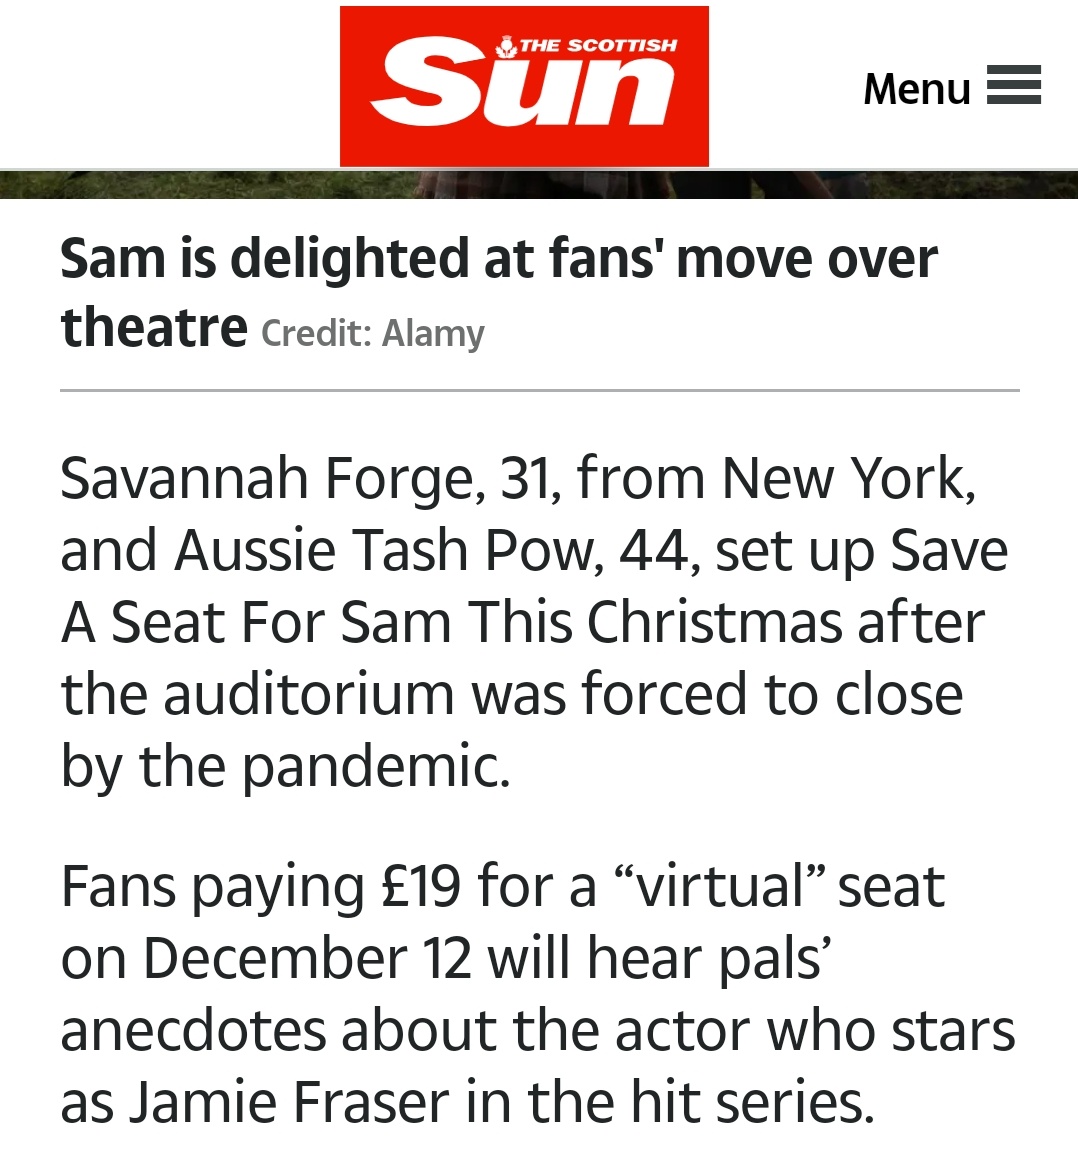 Finally.. Friday! Wow..that Thursday was a lot! So back to the press about  @SaveASeatForSam we go and another article about our hard-working, amazing  @SavannahhForge and  @peekaboo_jen ! Btw.. the ladies added a 4th show so everyone can be able to save a seat for Sam! #SamHeughan